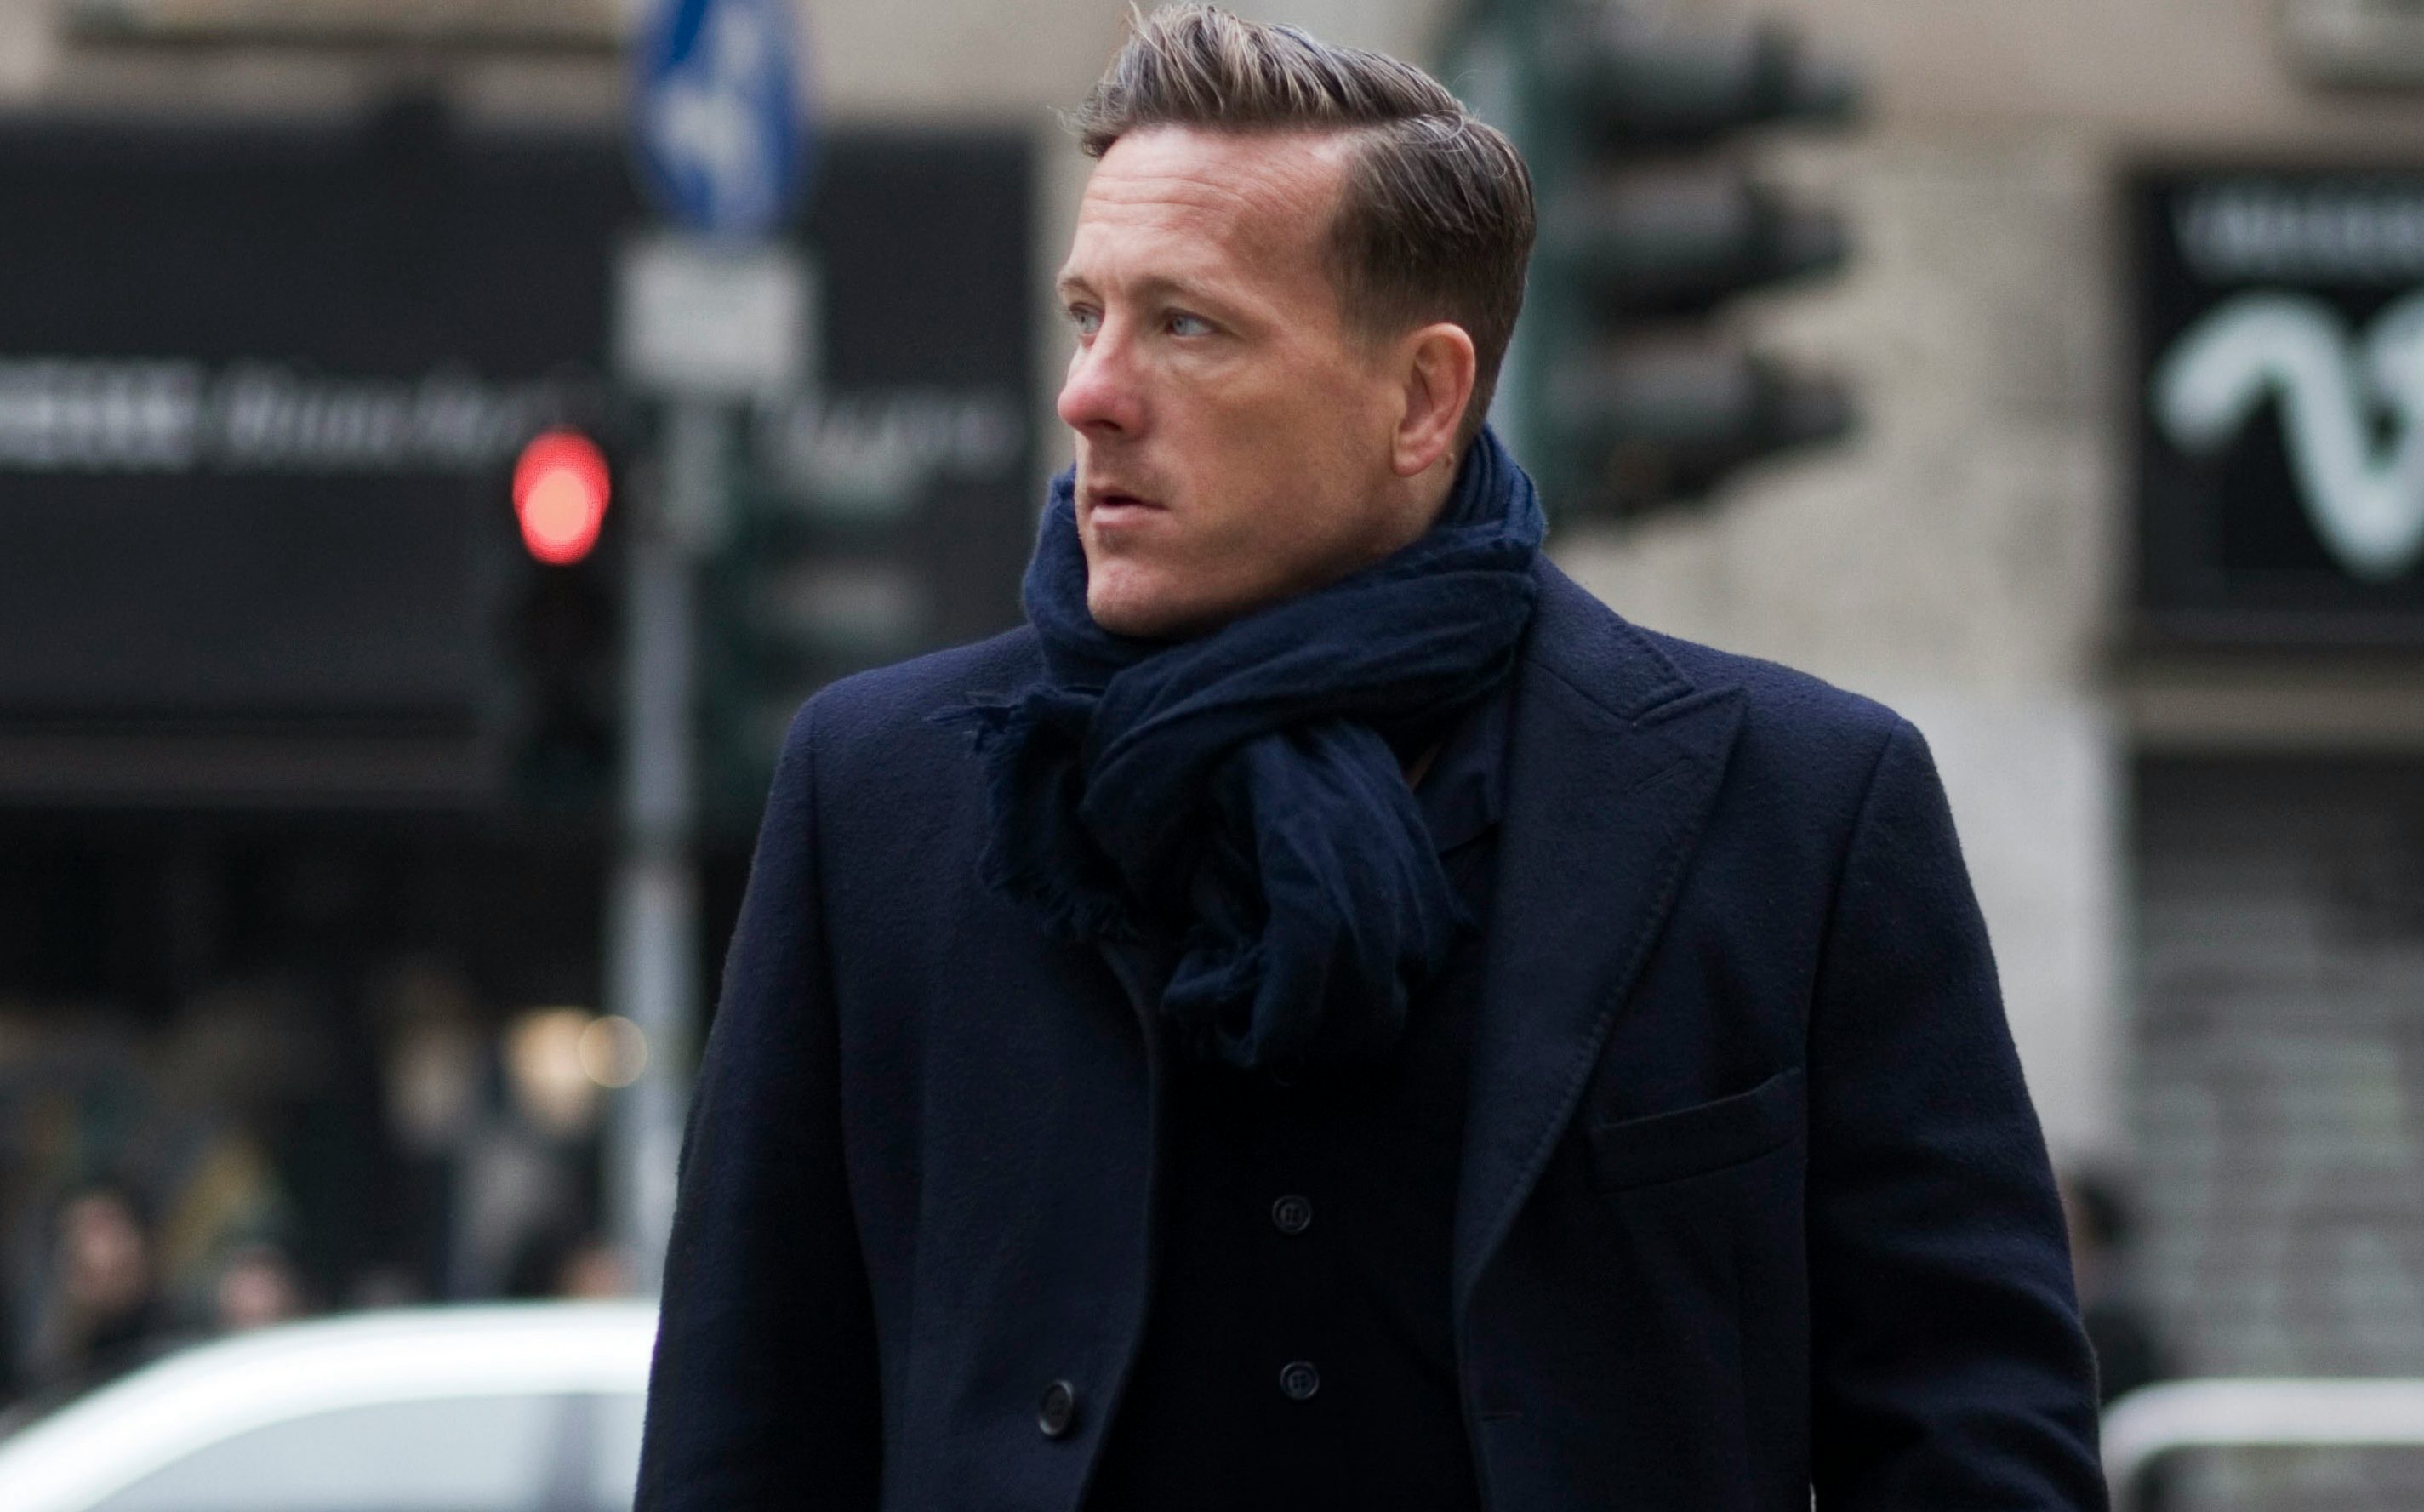 Scott Schuman | BoF 500 | The People Shaping the Global Fashion Industry